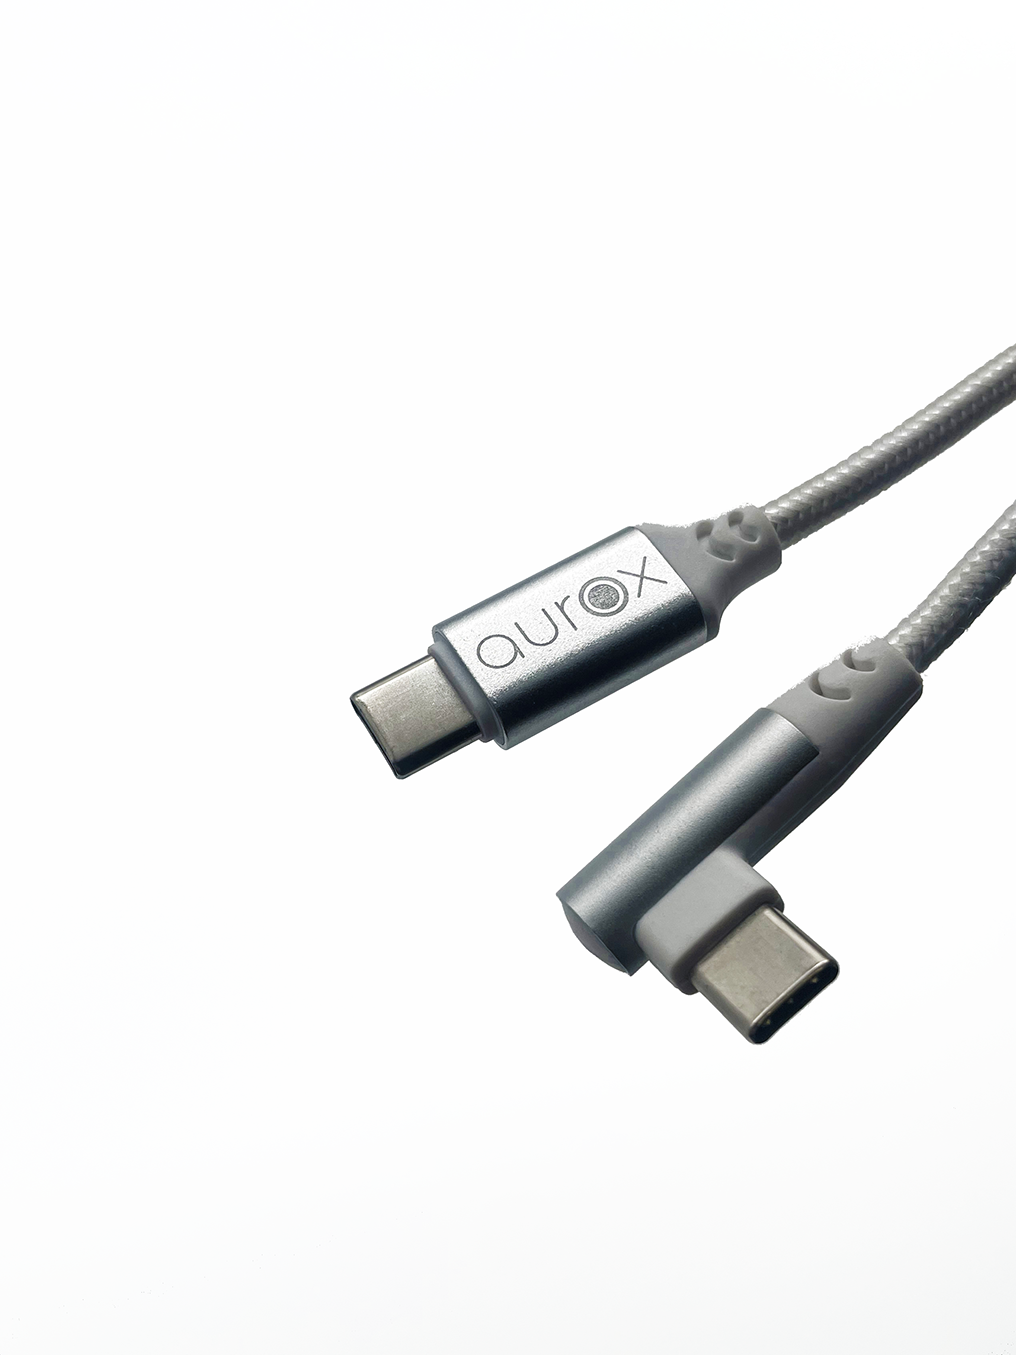 USB-Type C Cable (1.5m) - Accessory